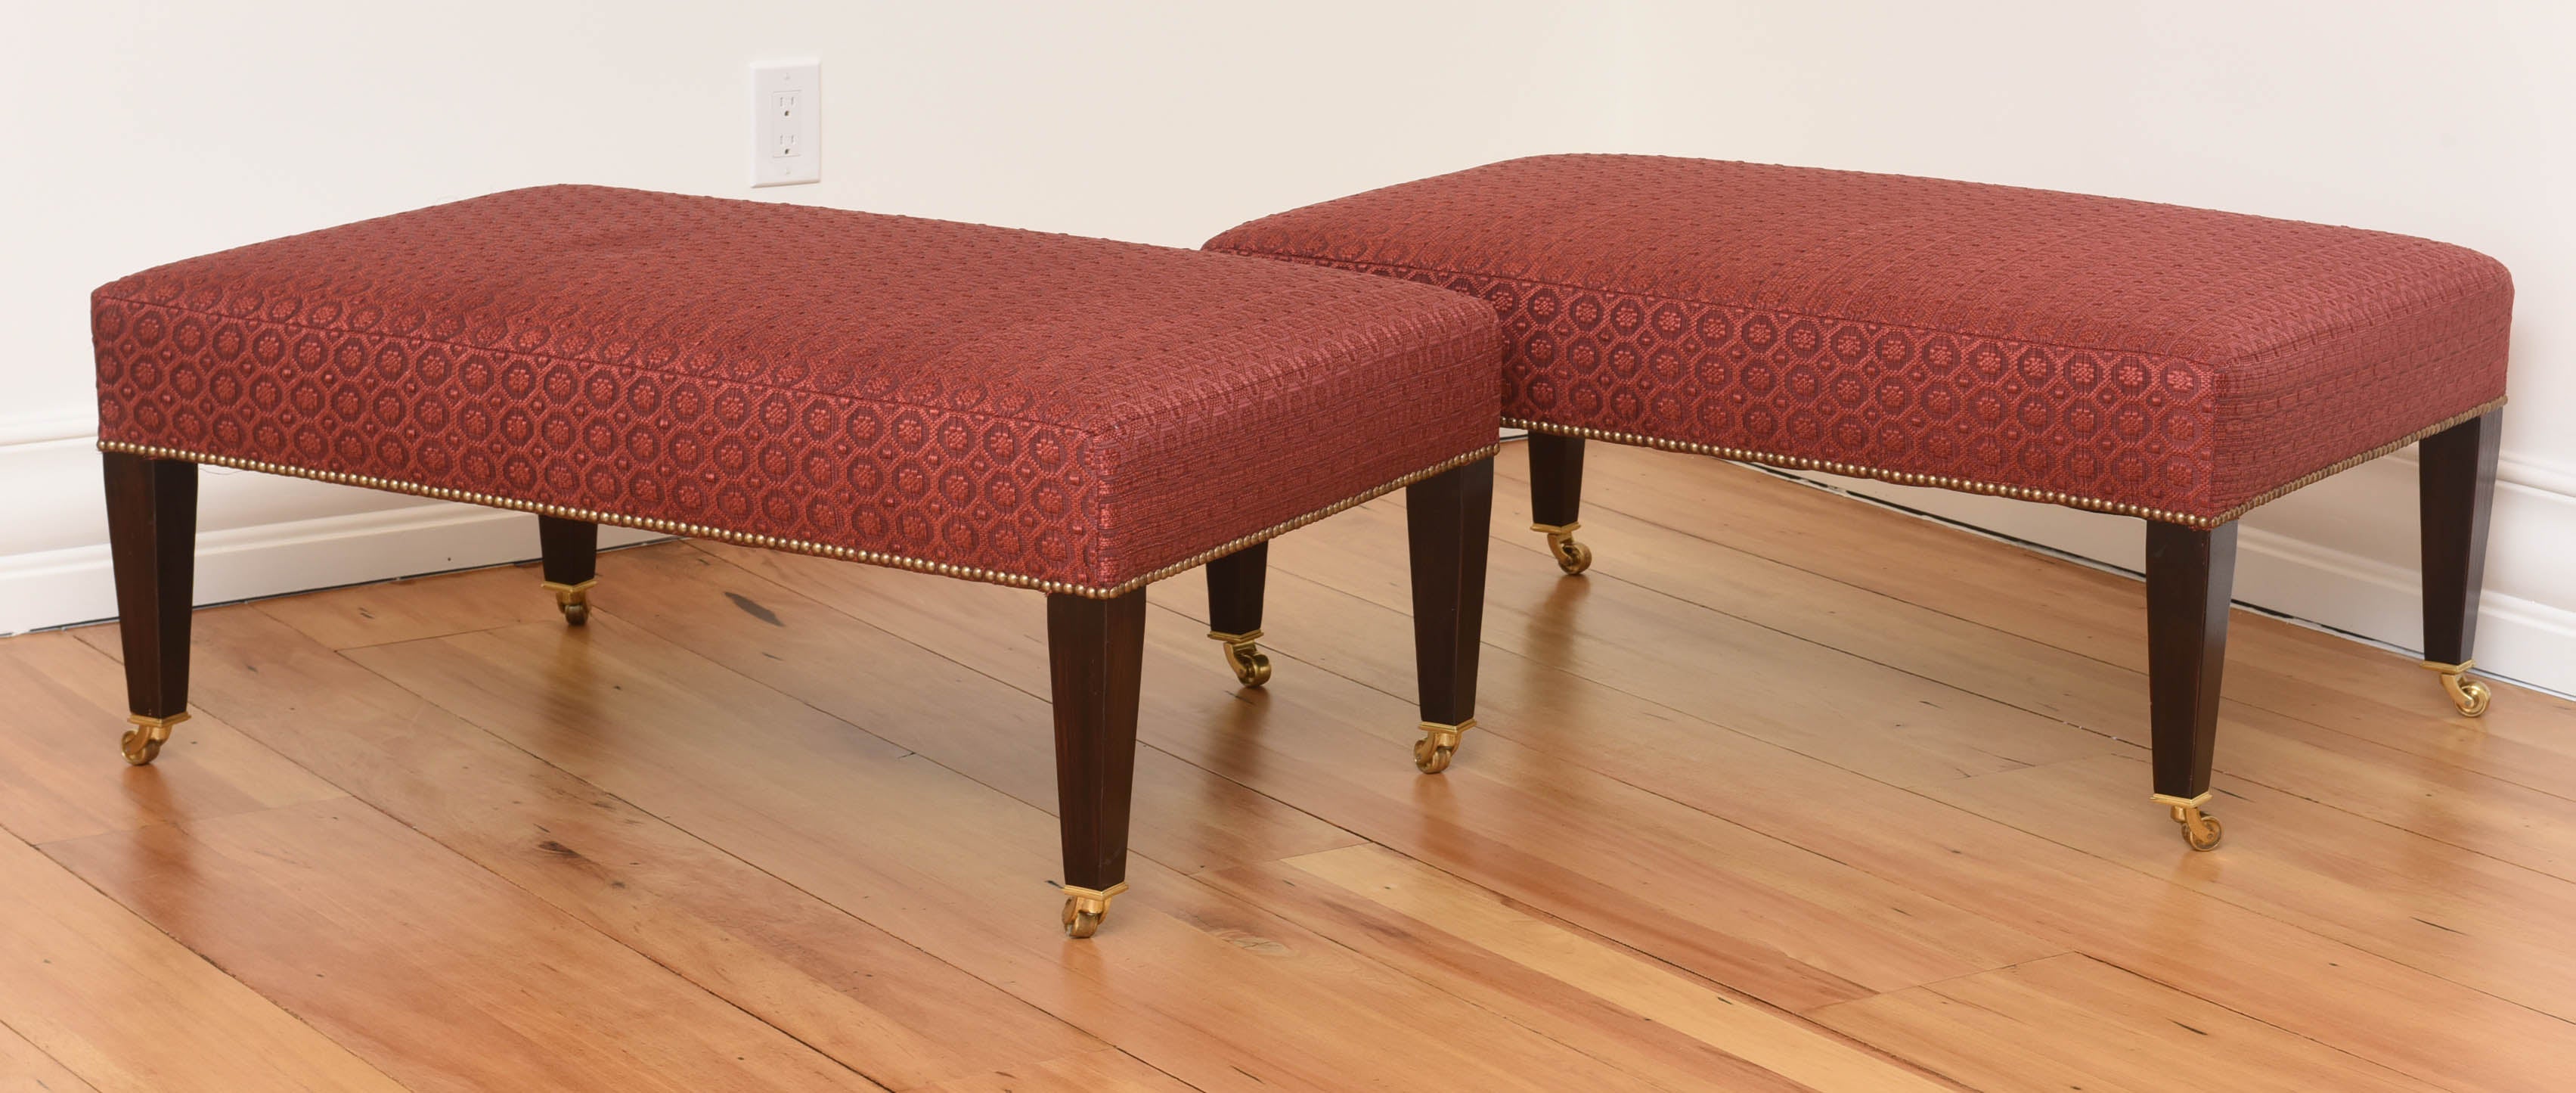 Pair of George Smith Tapered Leg Ottomans